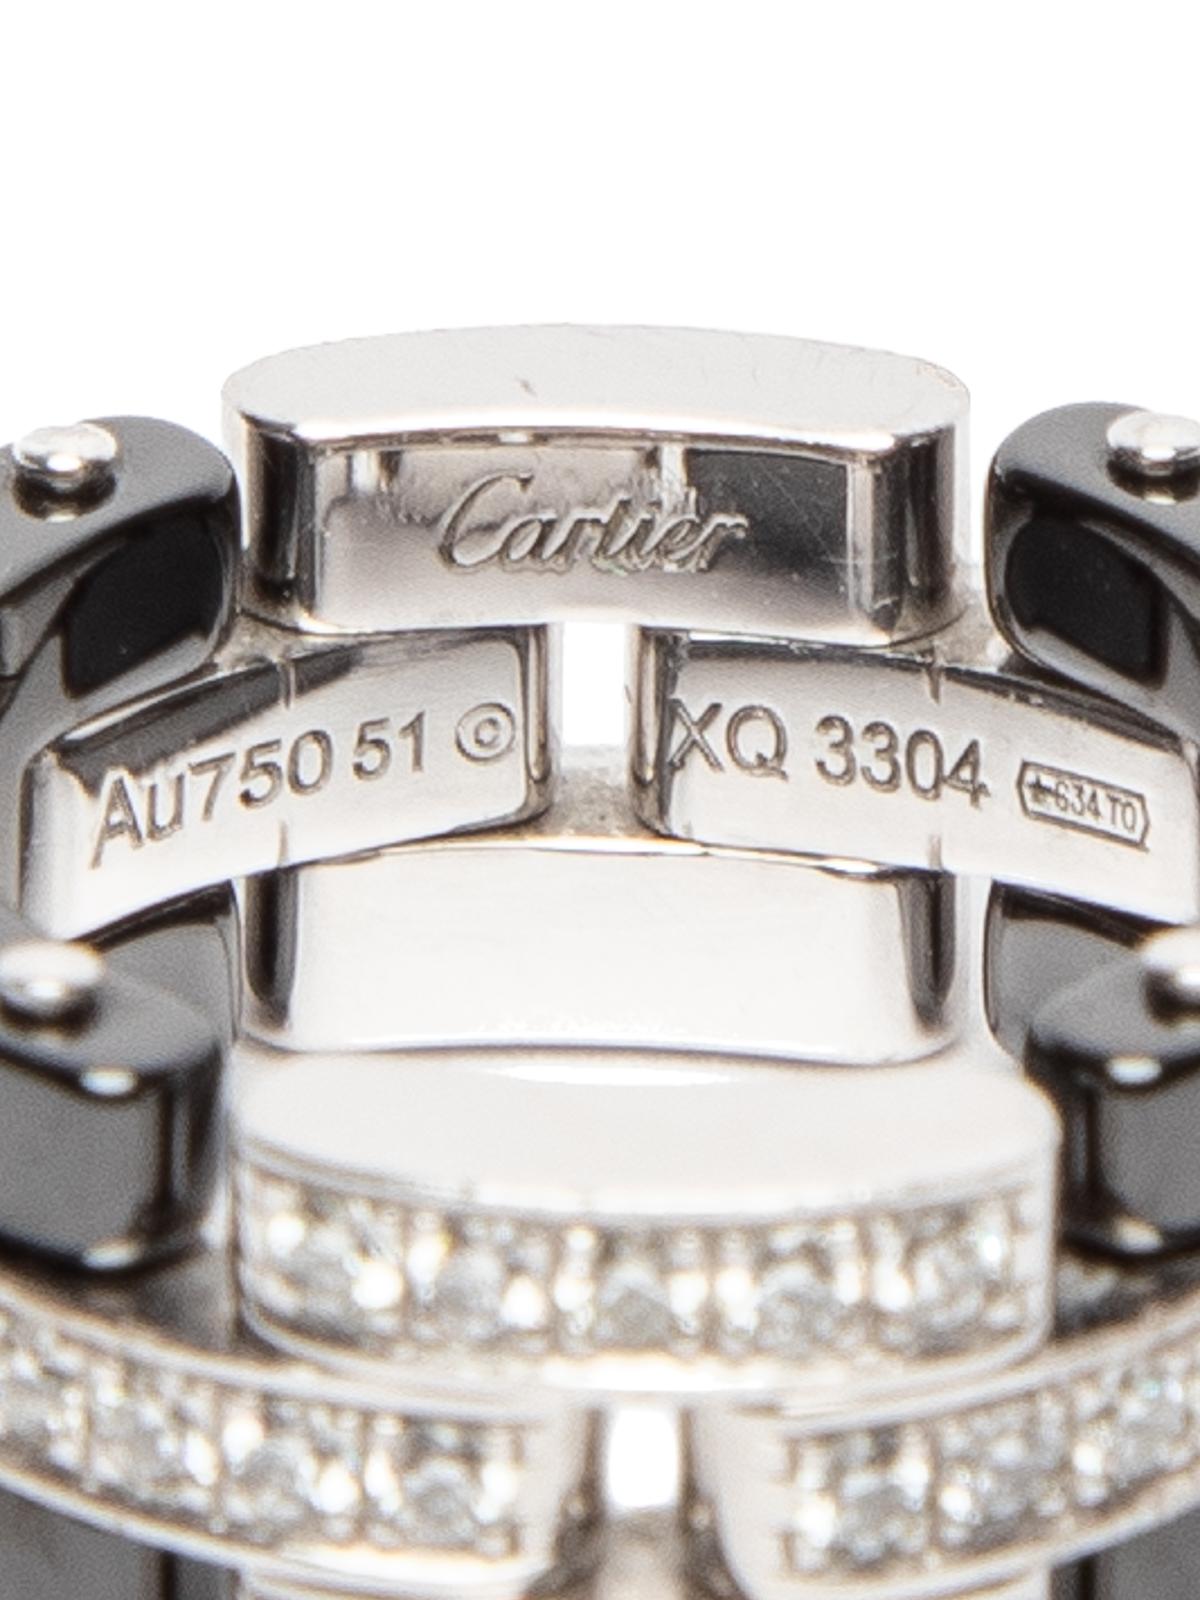 CONDITION is Good. Wear to ring is evident. Visible signs of wear and slightly visible scratches on this used Cartier designer resale item. Details White gold and diamonds Cartier logo embossed on interior Made in Switzerland Composition EXTERIOR: